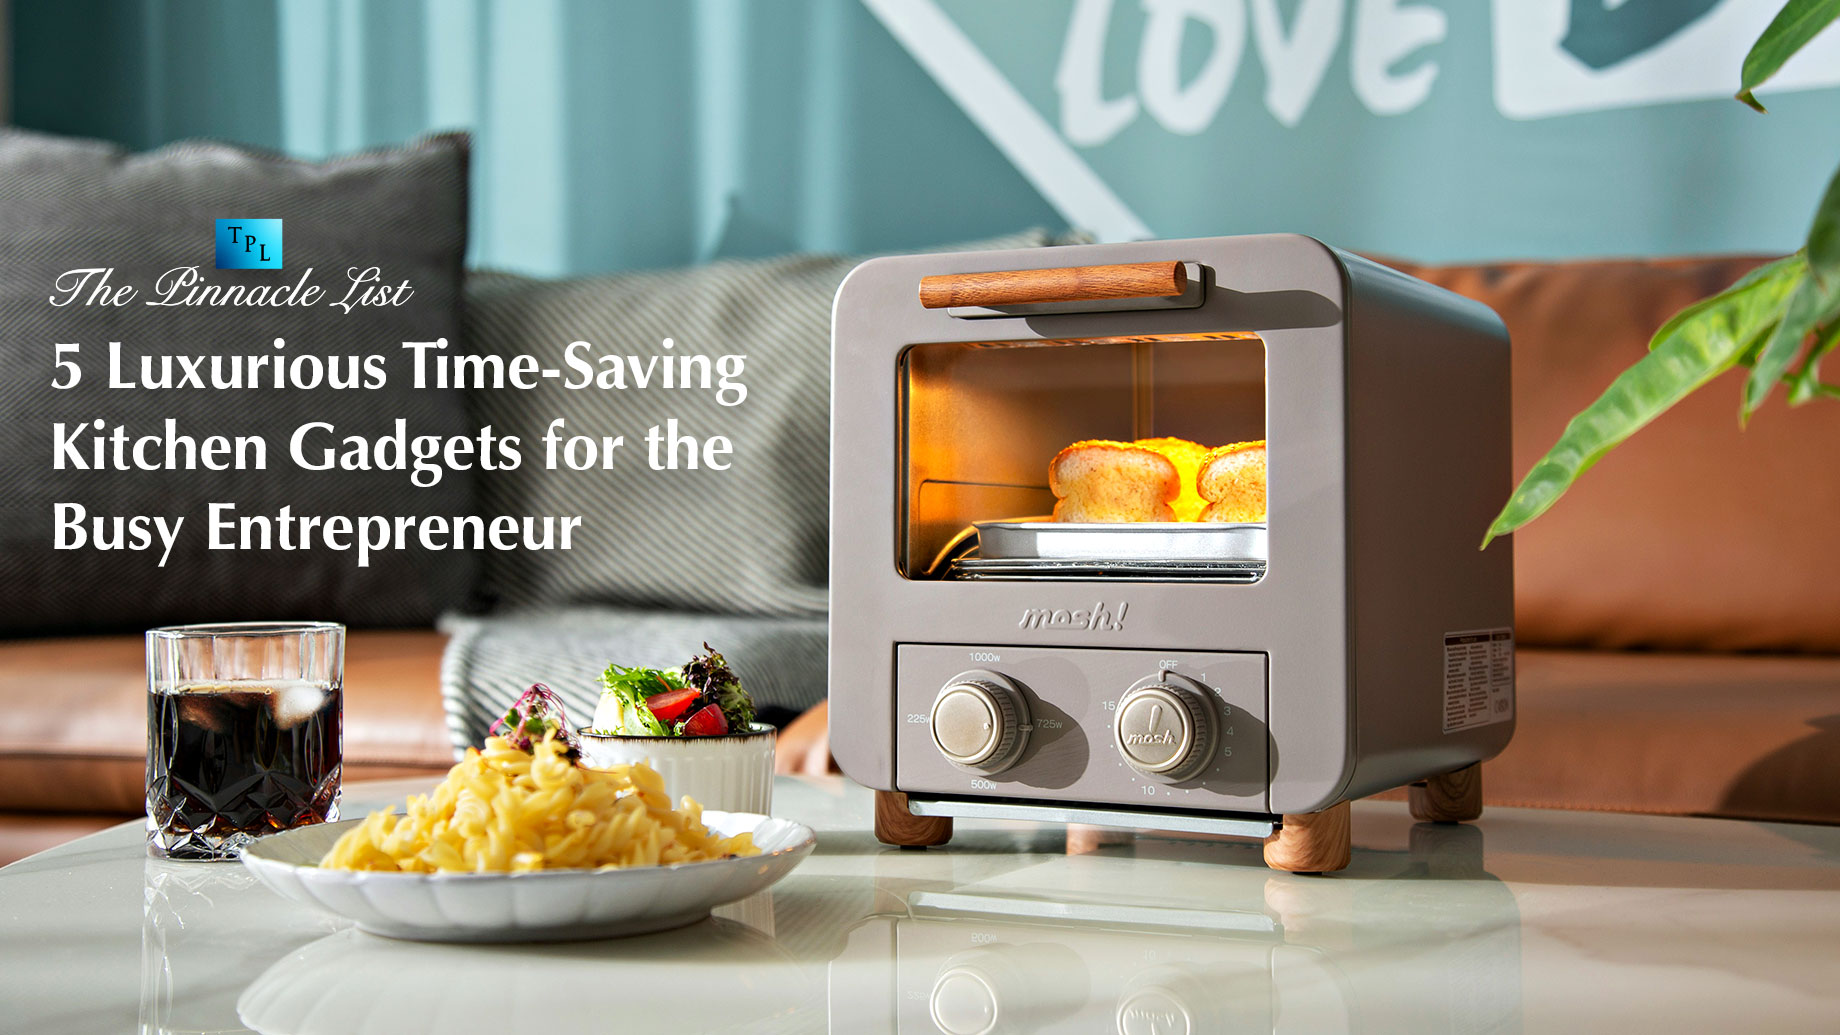 5 Luxurious Time-Saving Kitchen Gadgets for the Busy Entrepreneur